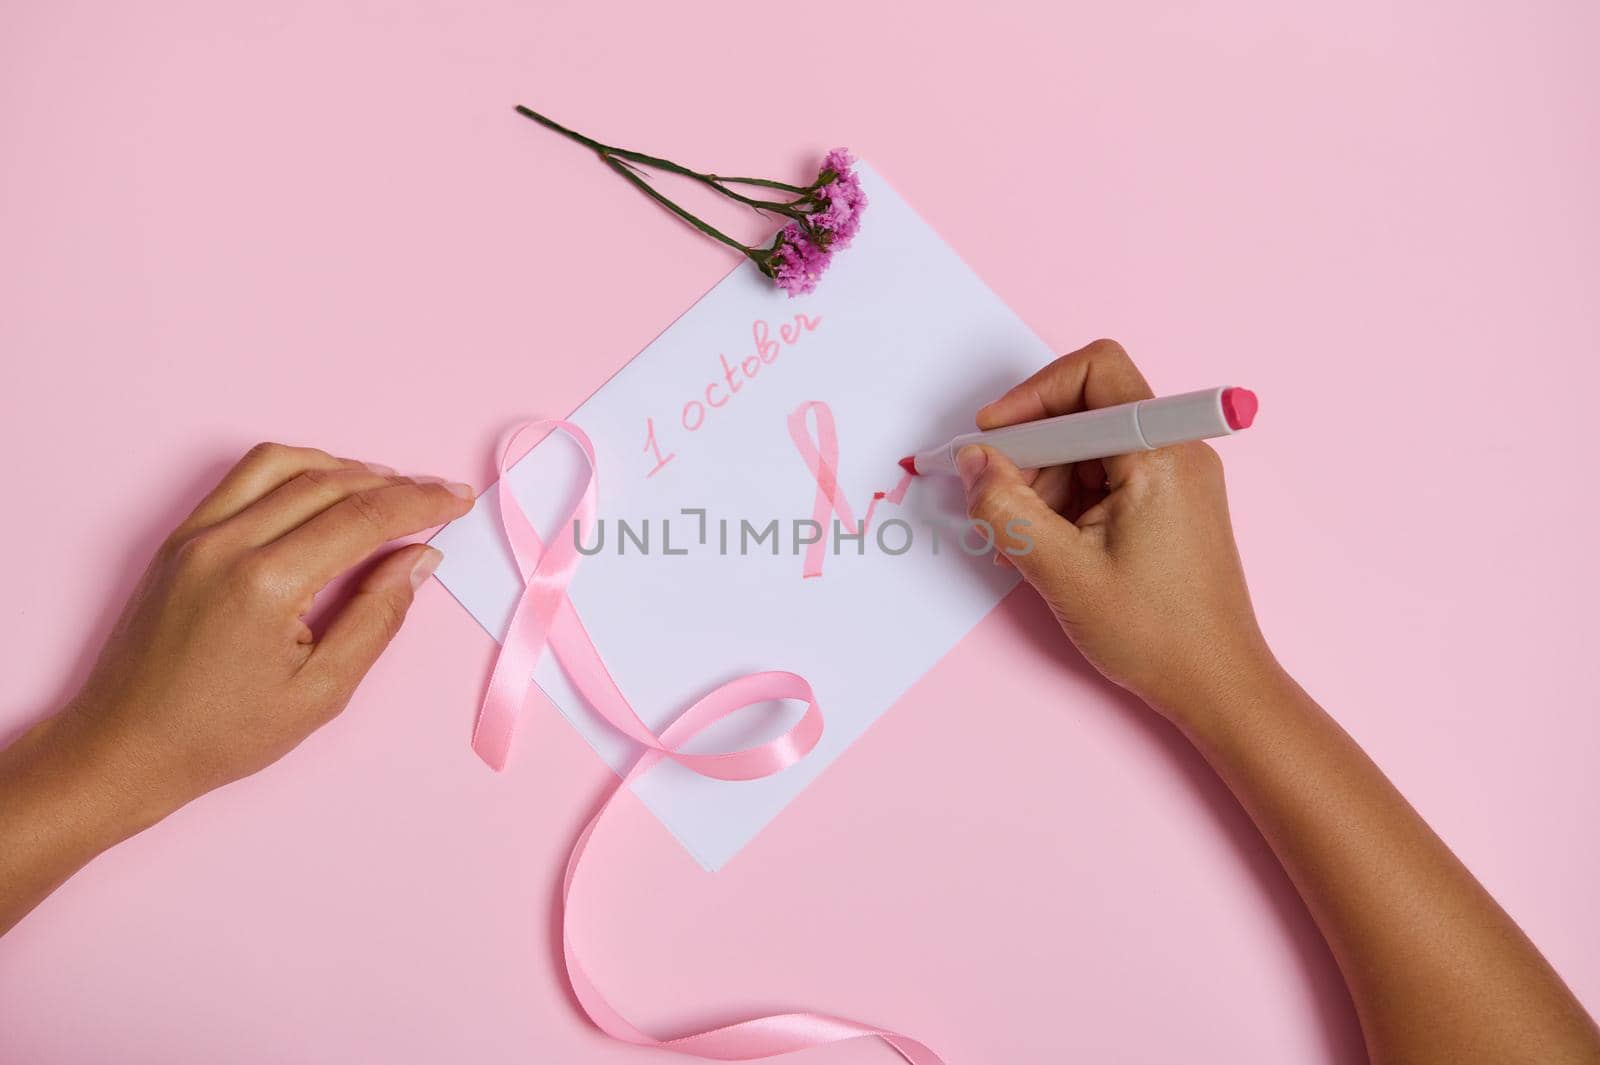 Woman's hand holds a felt-tip pen writes october 1 and draws on the paper a pink symbol of Breast Cancer Awareness Month, a pink ribbon with an endless end, lying on a pink background